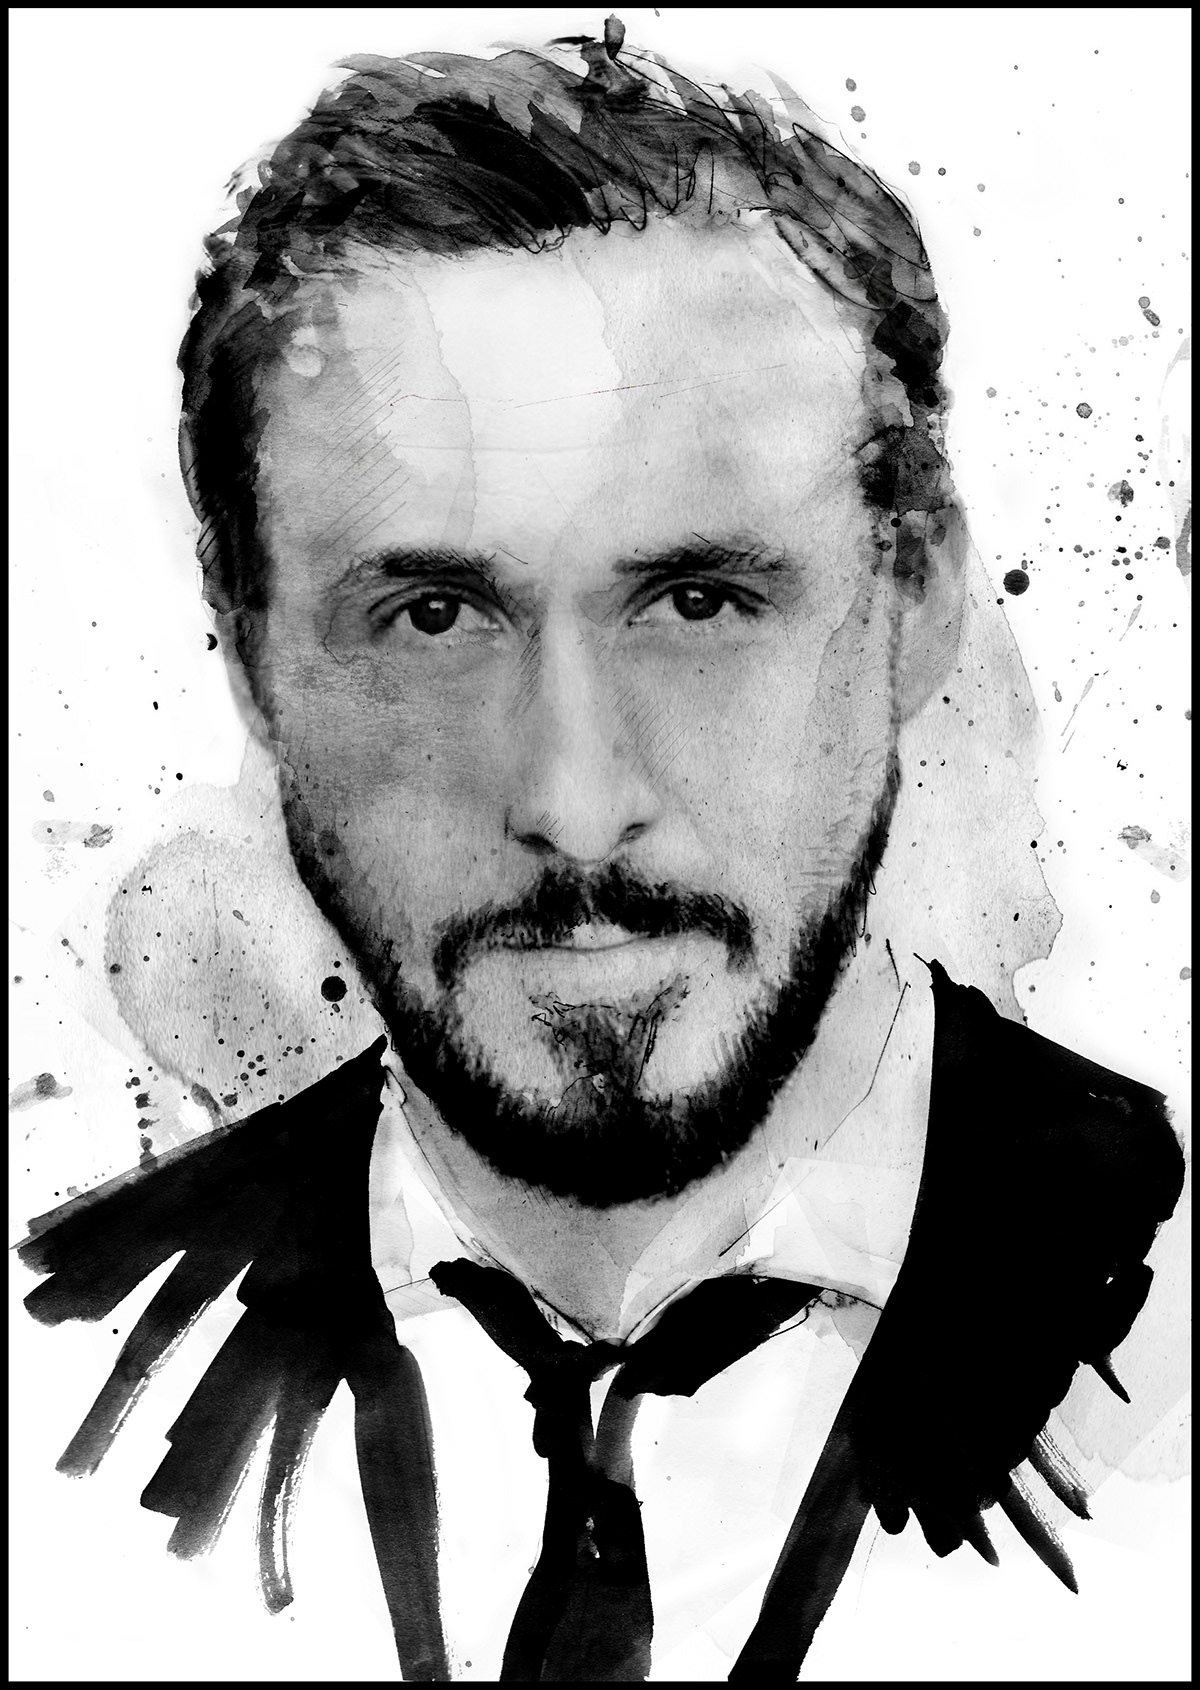 ink Squid watercolour tradigital portrait black and white famous illustrations digital mixed media robert downey jr james mcavoy